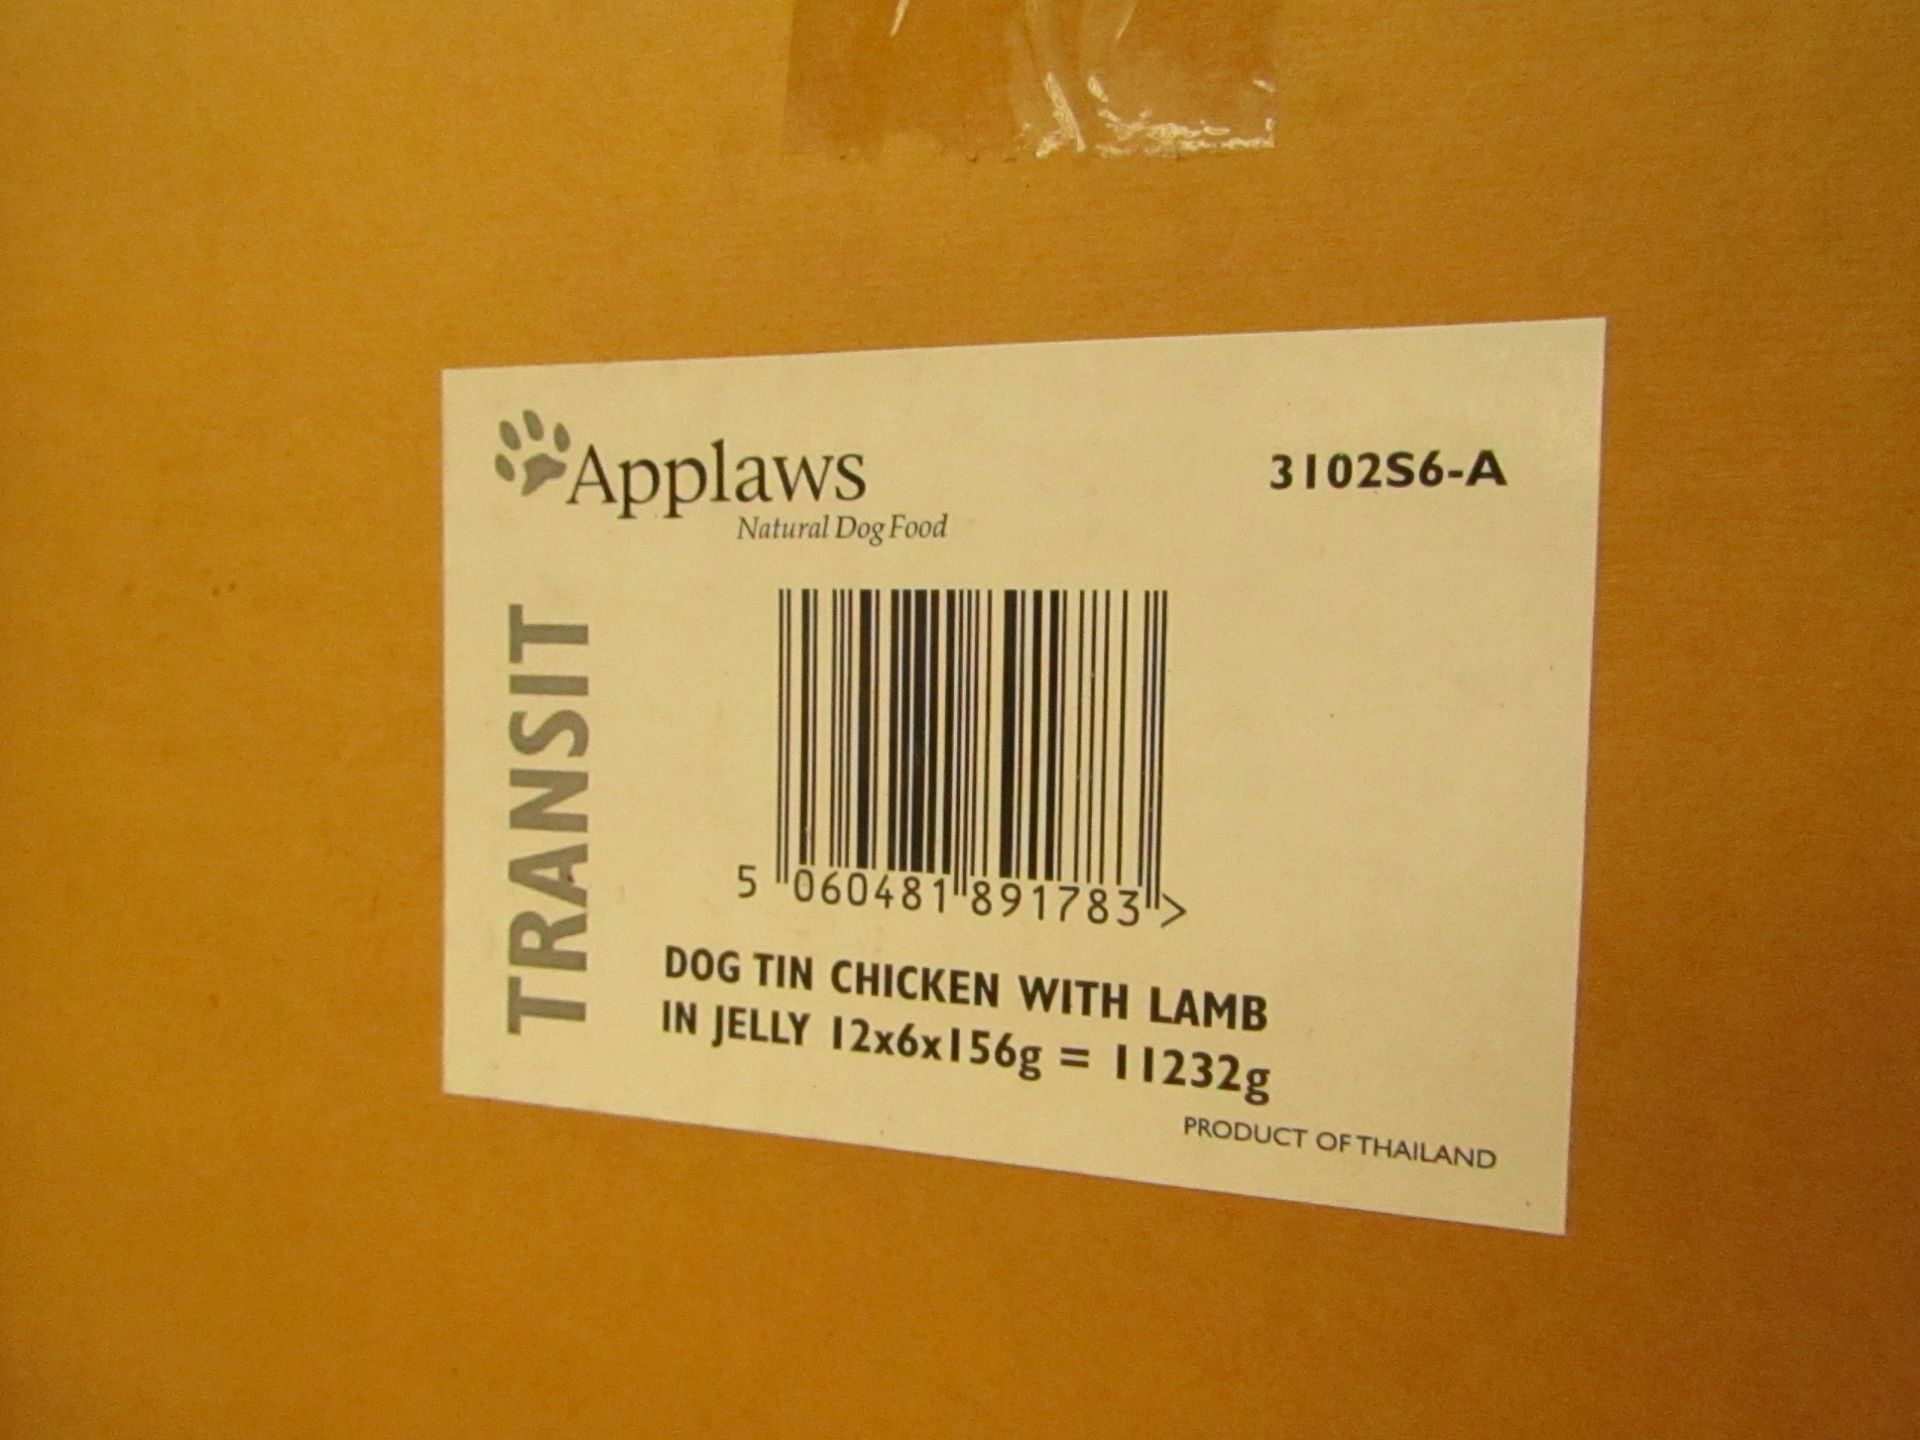 72x Applaws - Dog Tin Chicken Lamb & Jelly - BB 24/08/20 - Unused & Boxed.